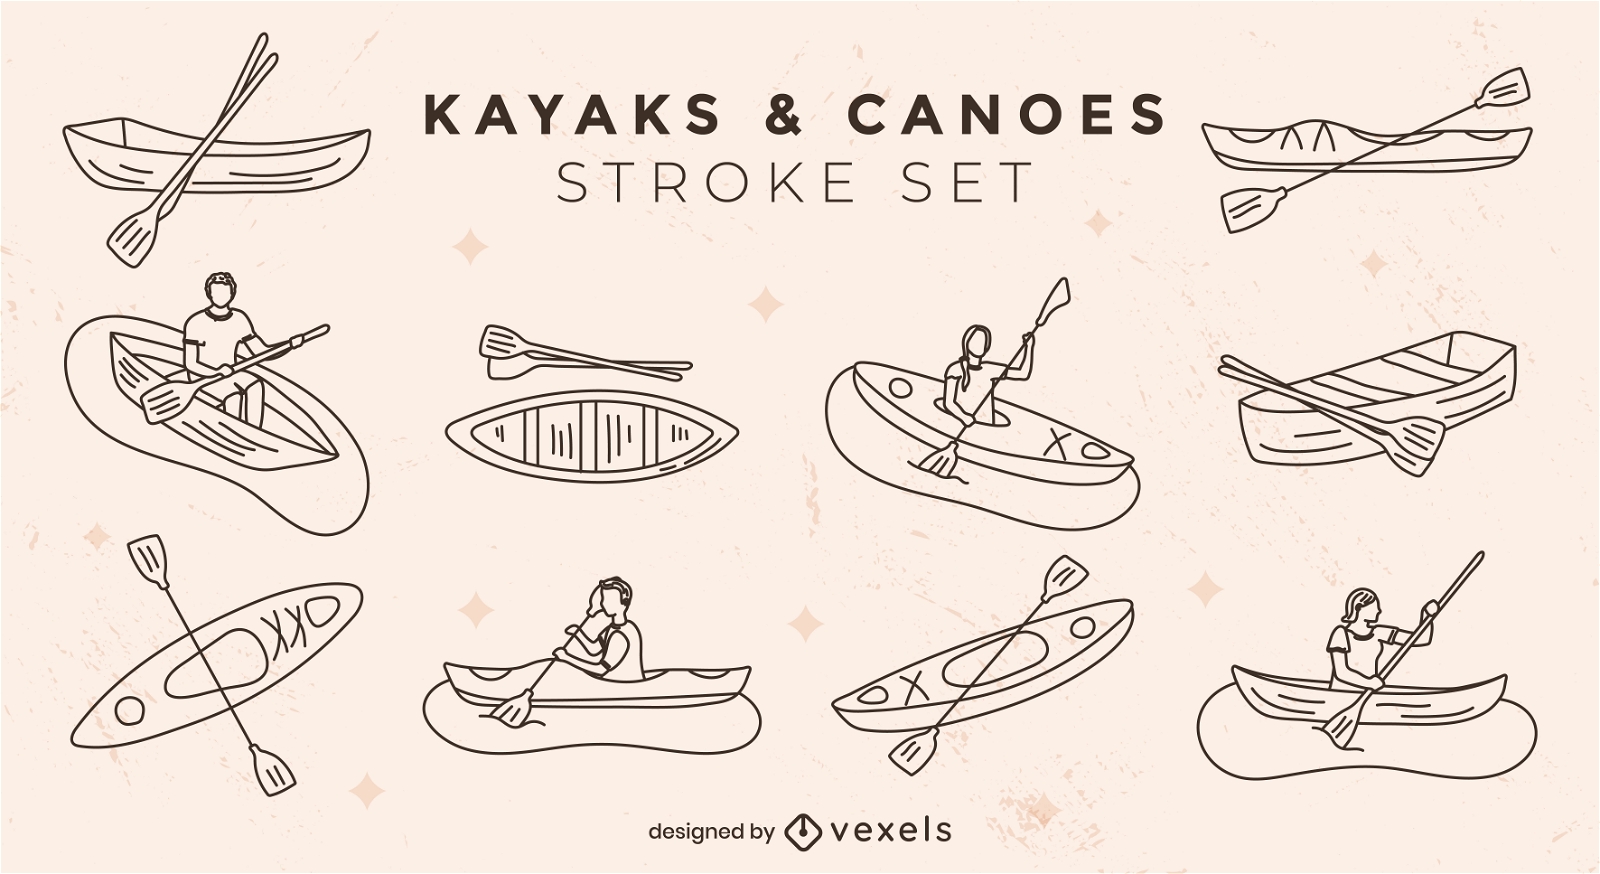 Kayaks and canoes stroke set